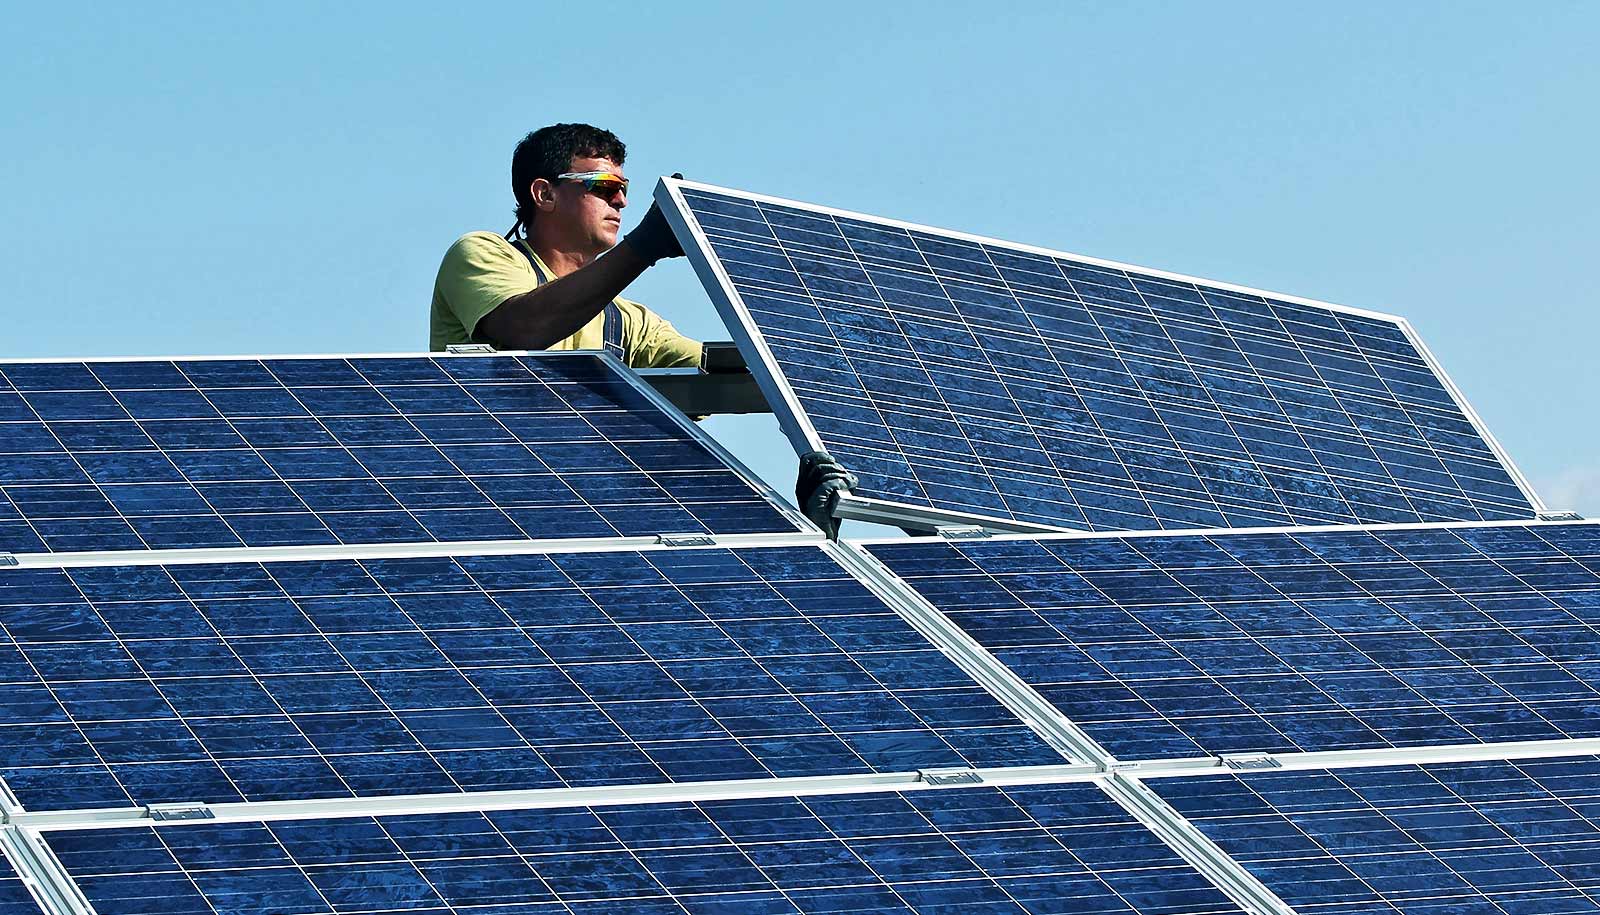 NEW TOOL DIAGNOSES SICK SOLAR PANELS IN REAL